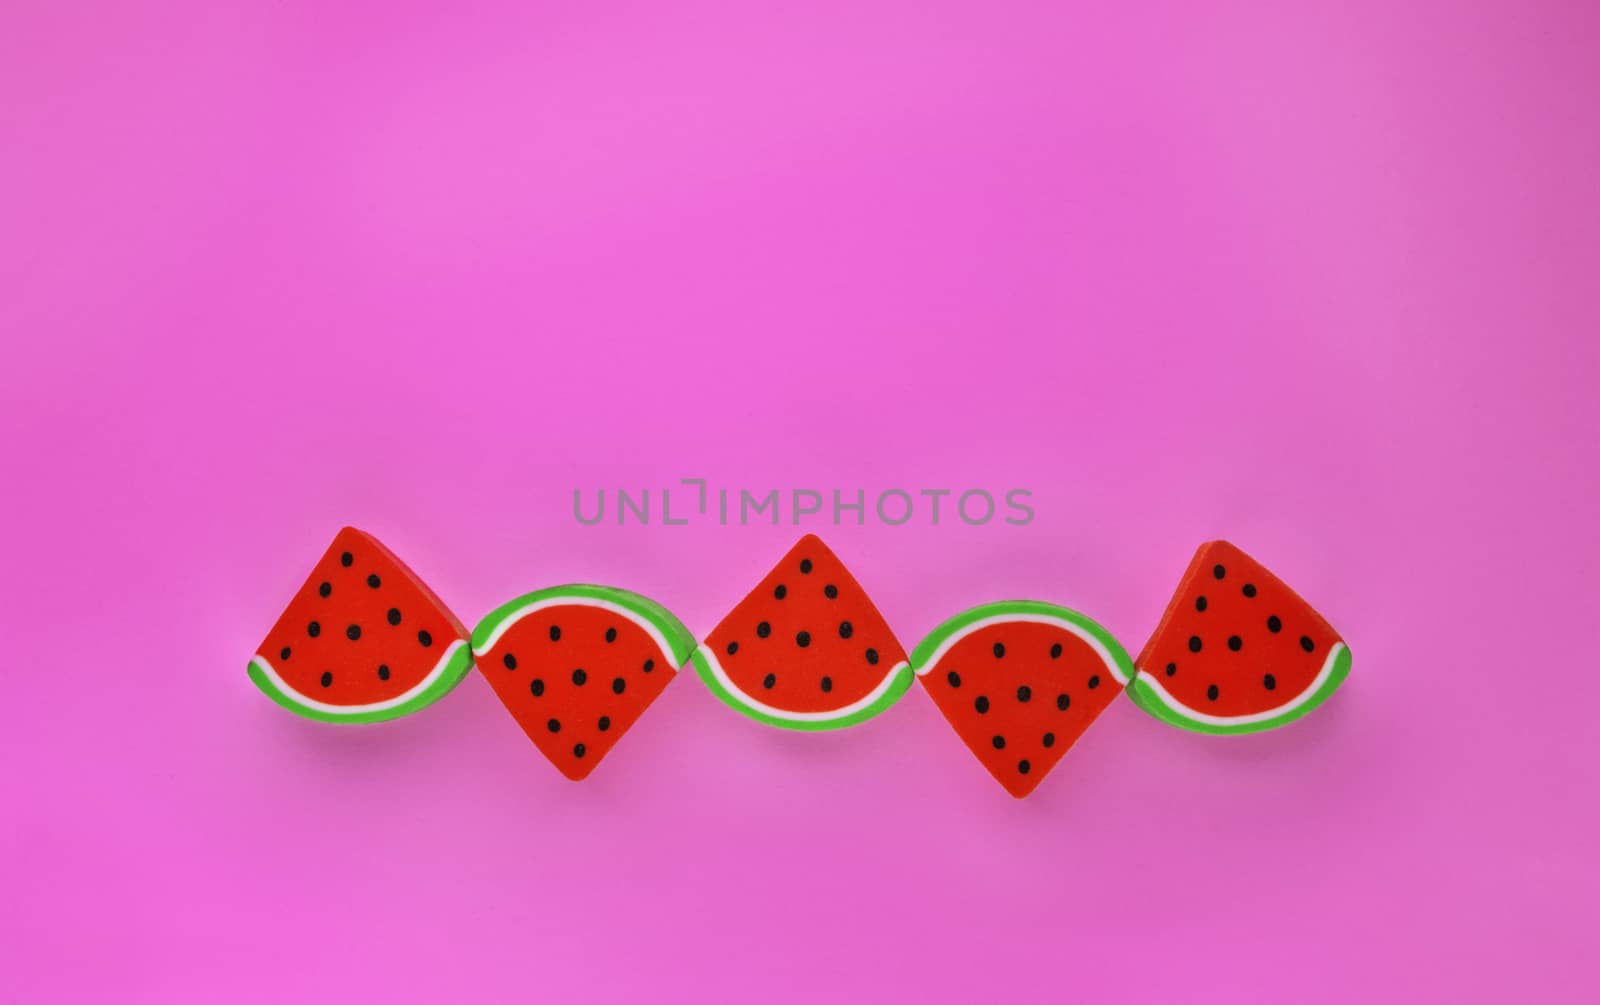 A group of erasers shaped like sliced watermelon in a row on a colored background ,simple composition